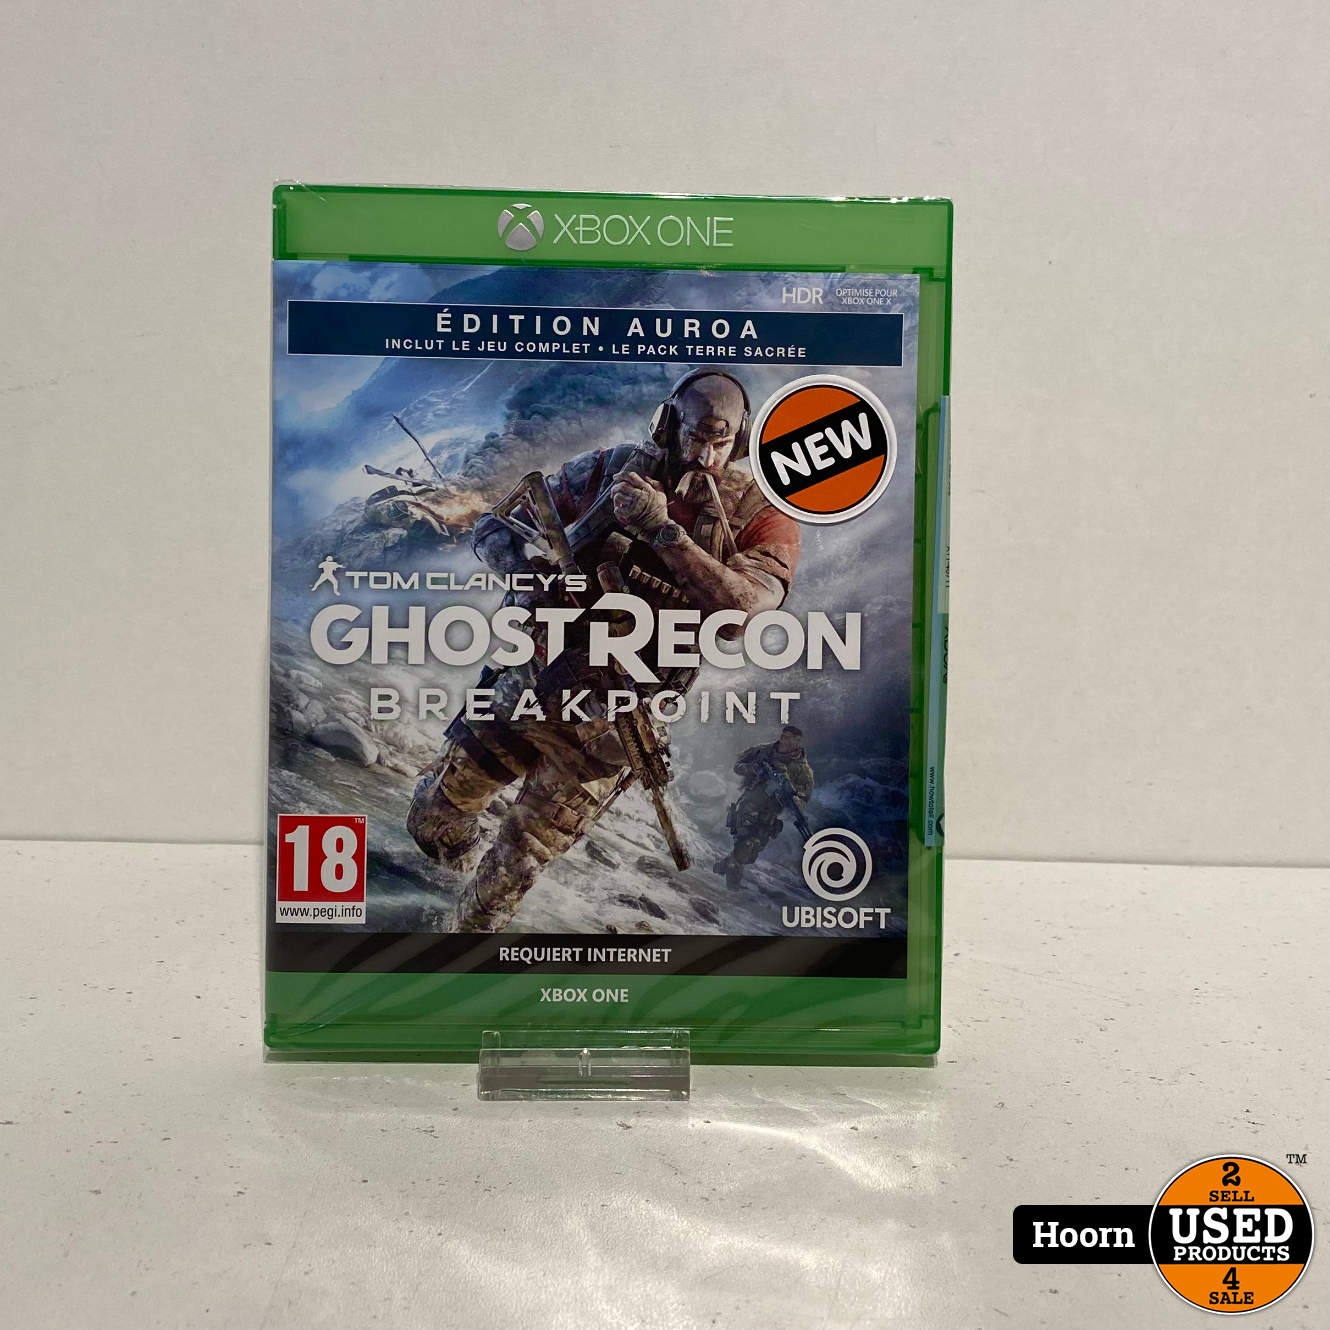 Xbox One Game: Ghost Recon Auroa Nieuw in Seal - Used Products Hoorn